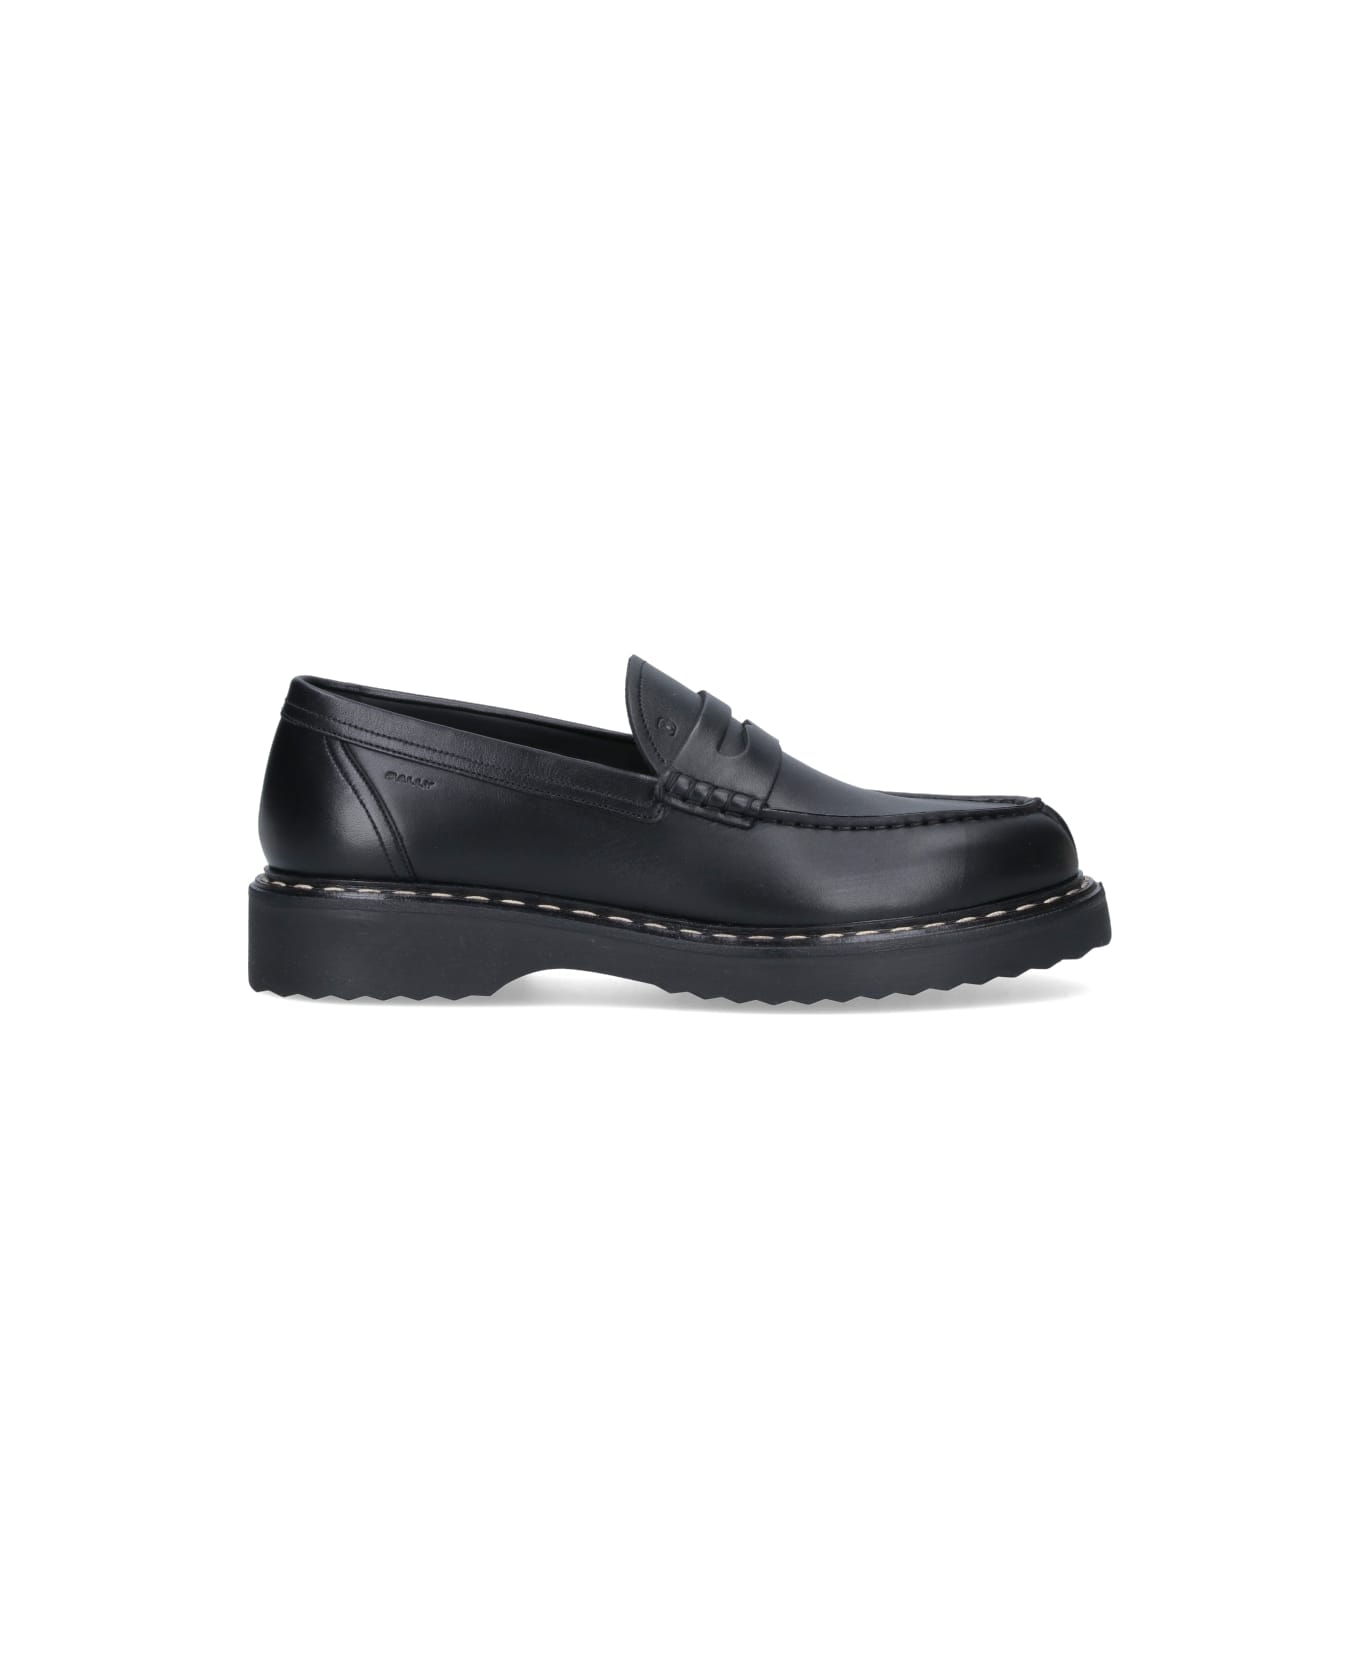 Bally Leather Loafers - Black  